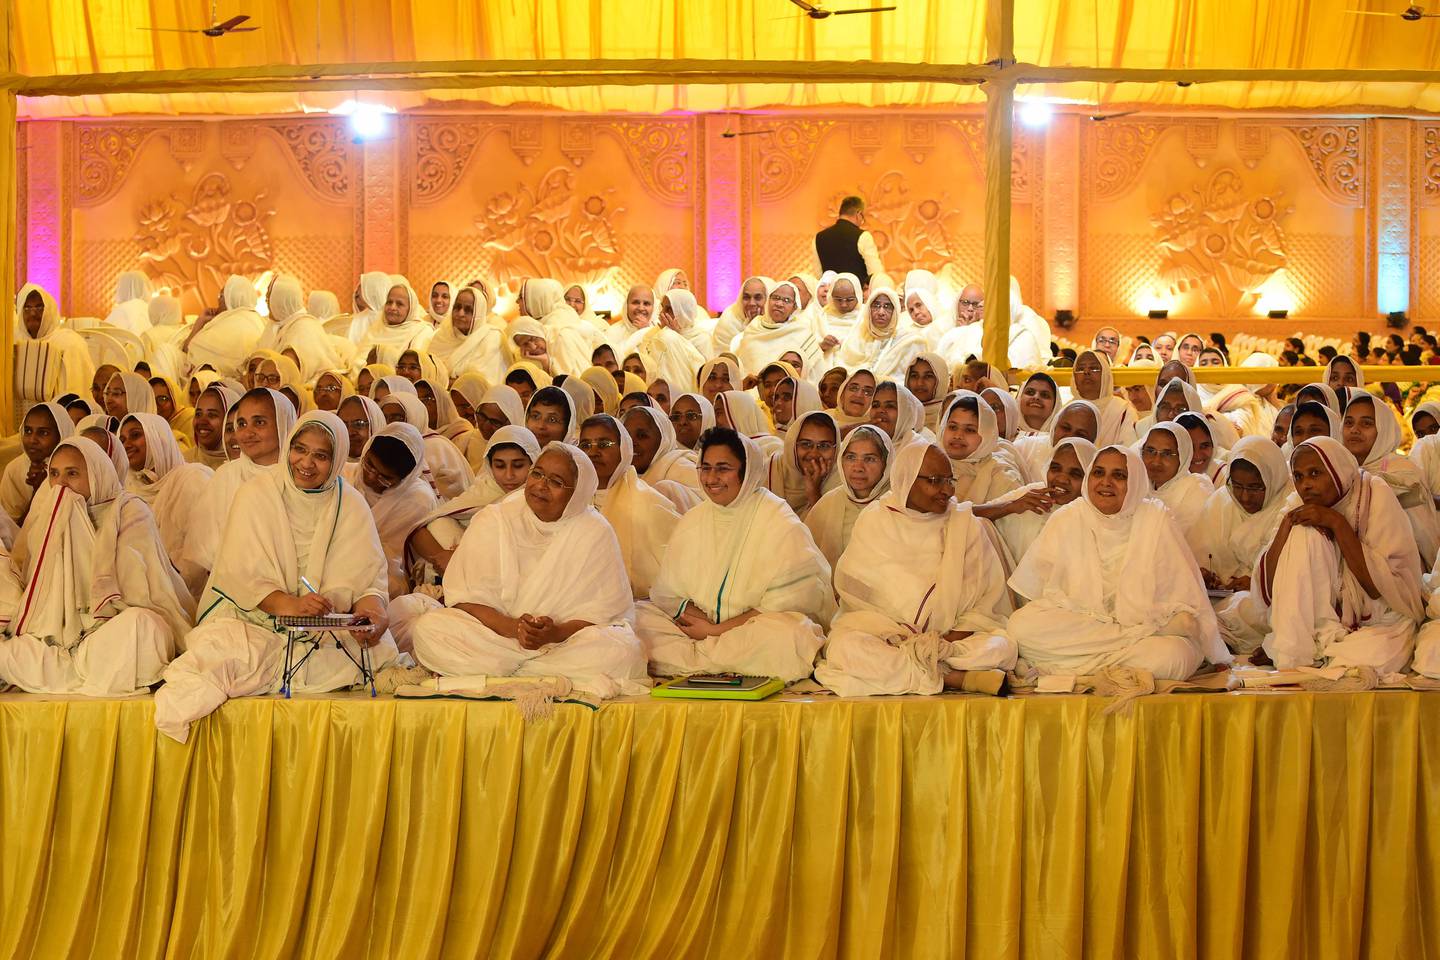 Nuns from the Jain community attend the Sparsh Mahotsav festival in Ahmedabad on Monday. AFP